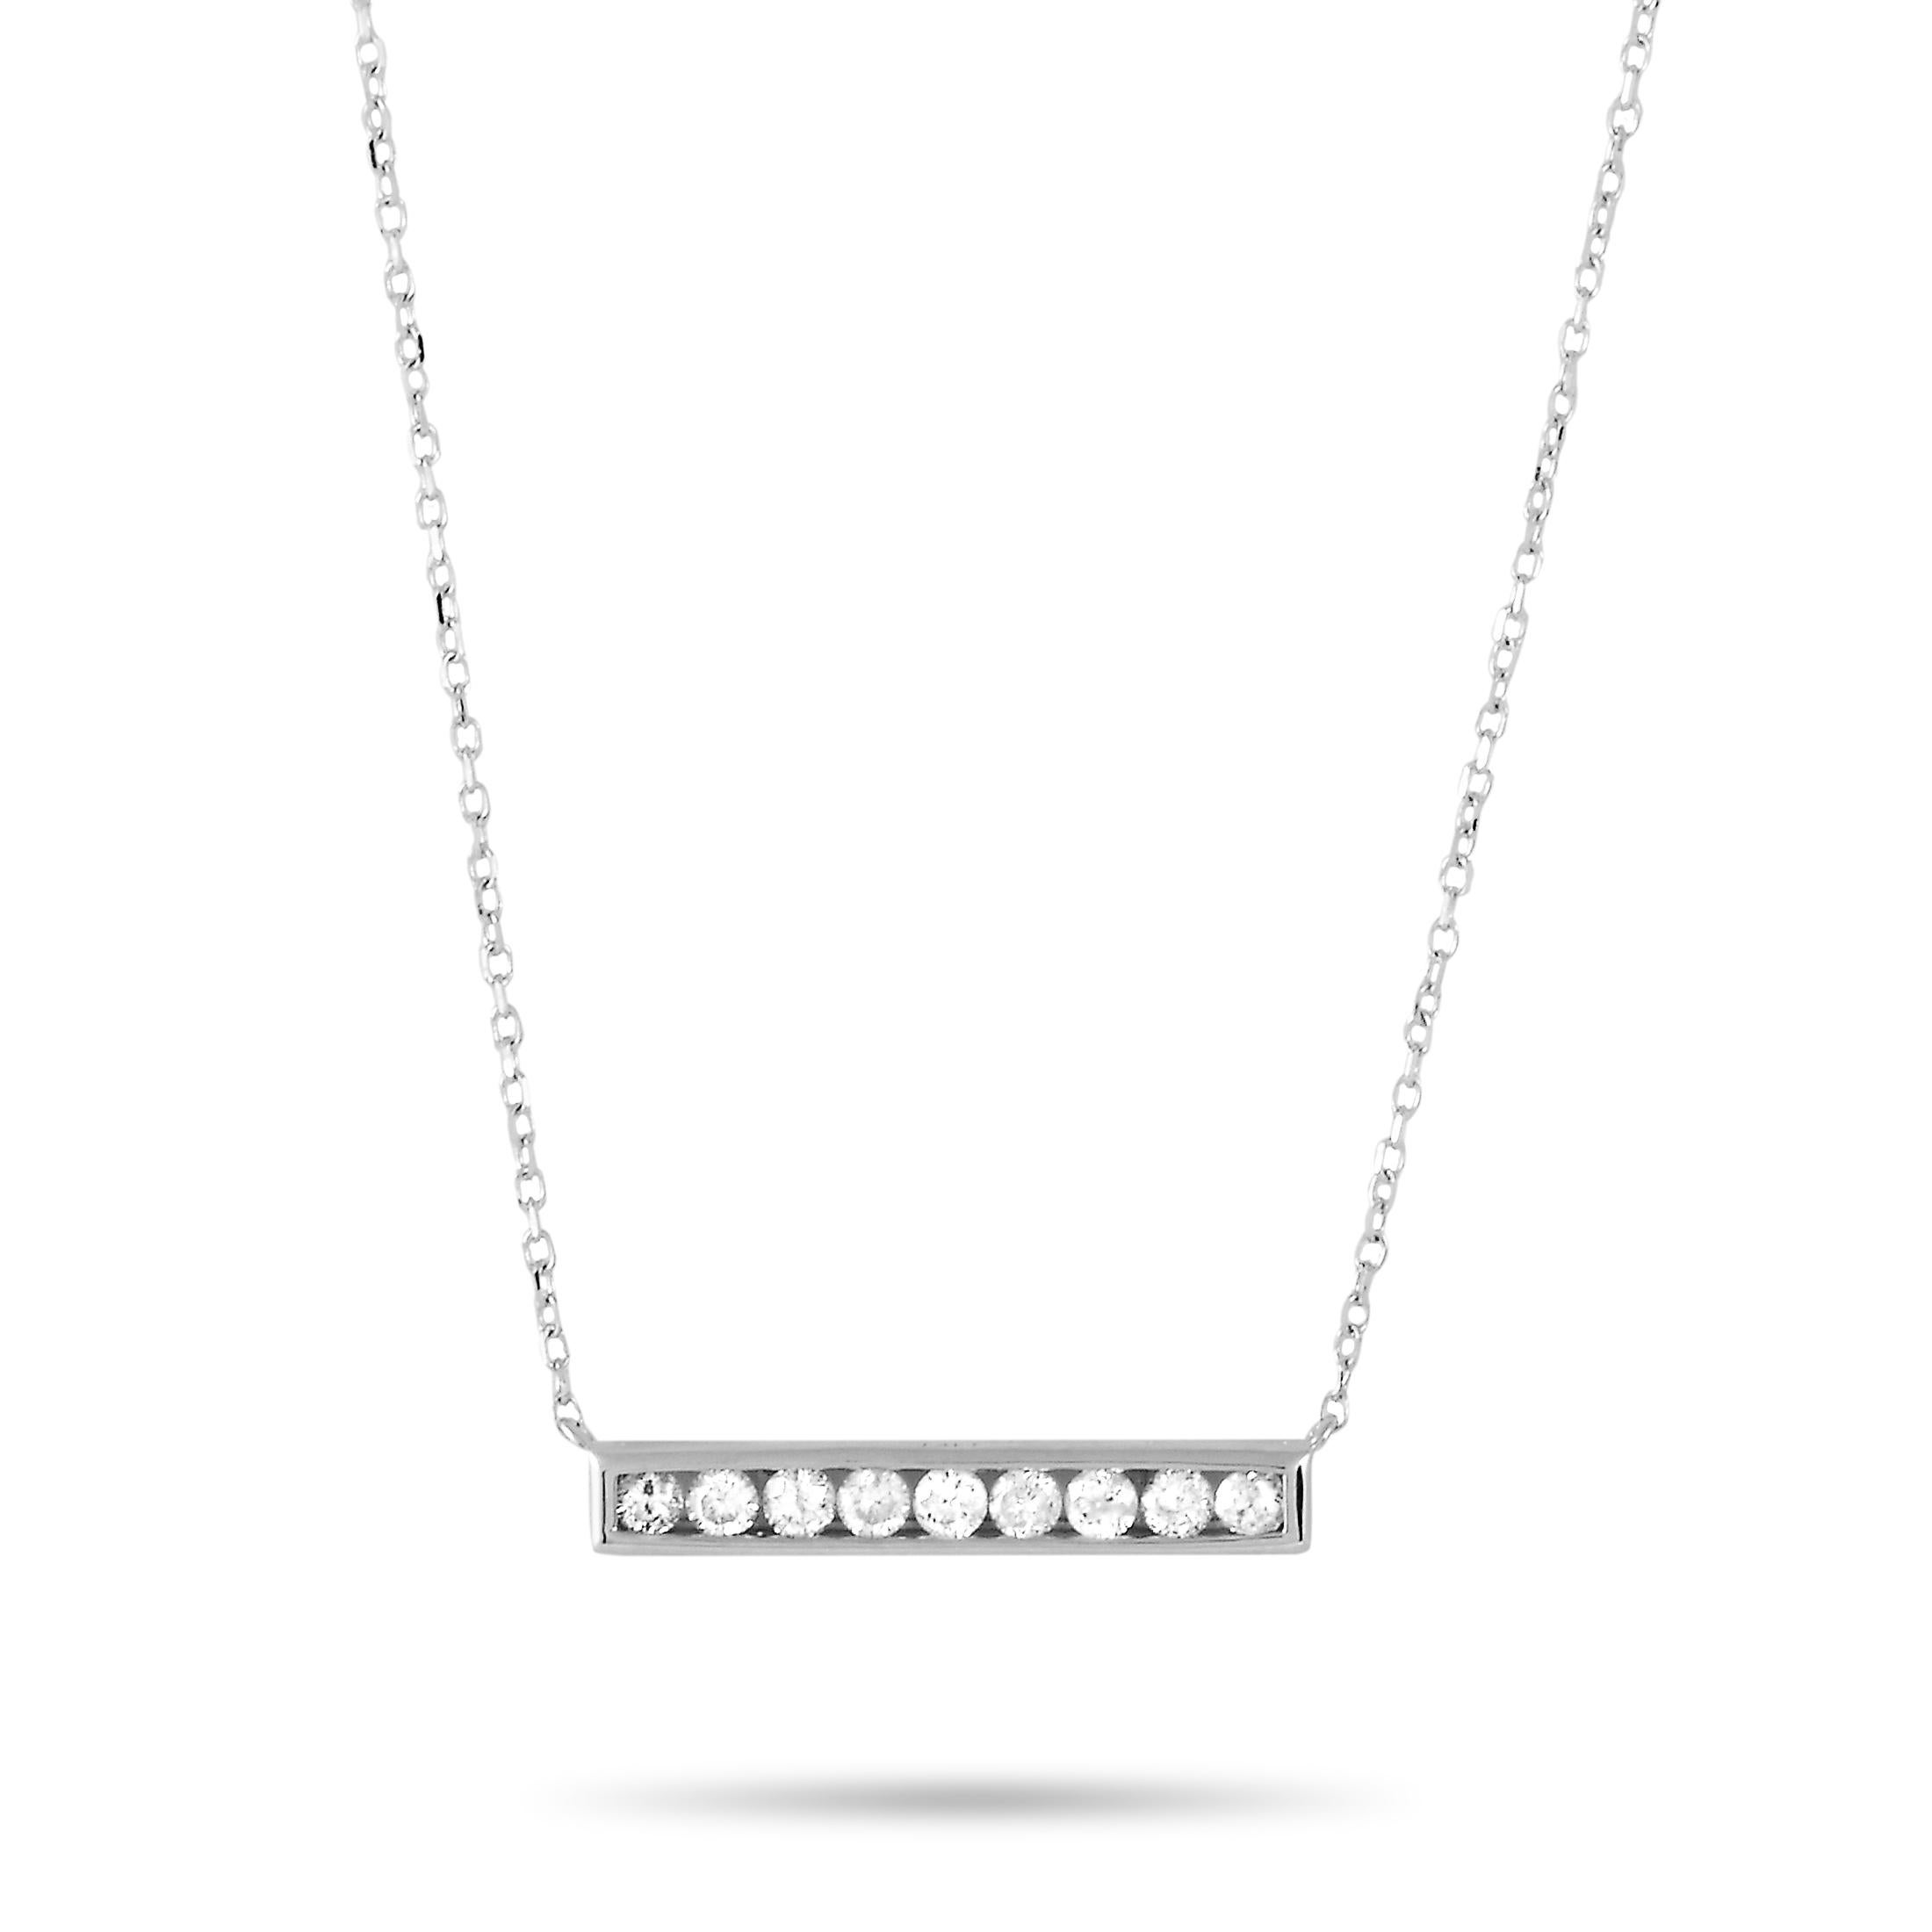 This LB Exclusive necklace is made of 14K white gold and embellished with diamonds that amount to 0.25 carats. The necklace weighs 1.8 grams and boasts a 15” chain and a pendant that measures 0.75” in width.
 
 Offered in brand new condition, this